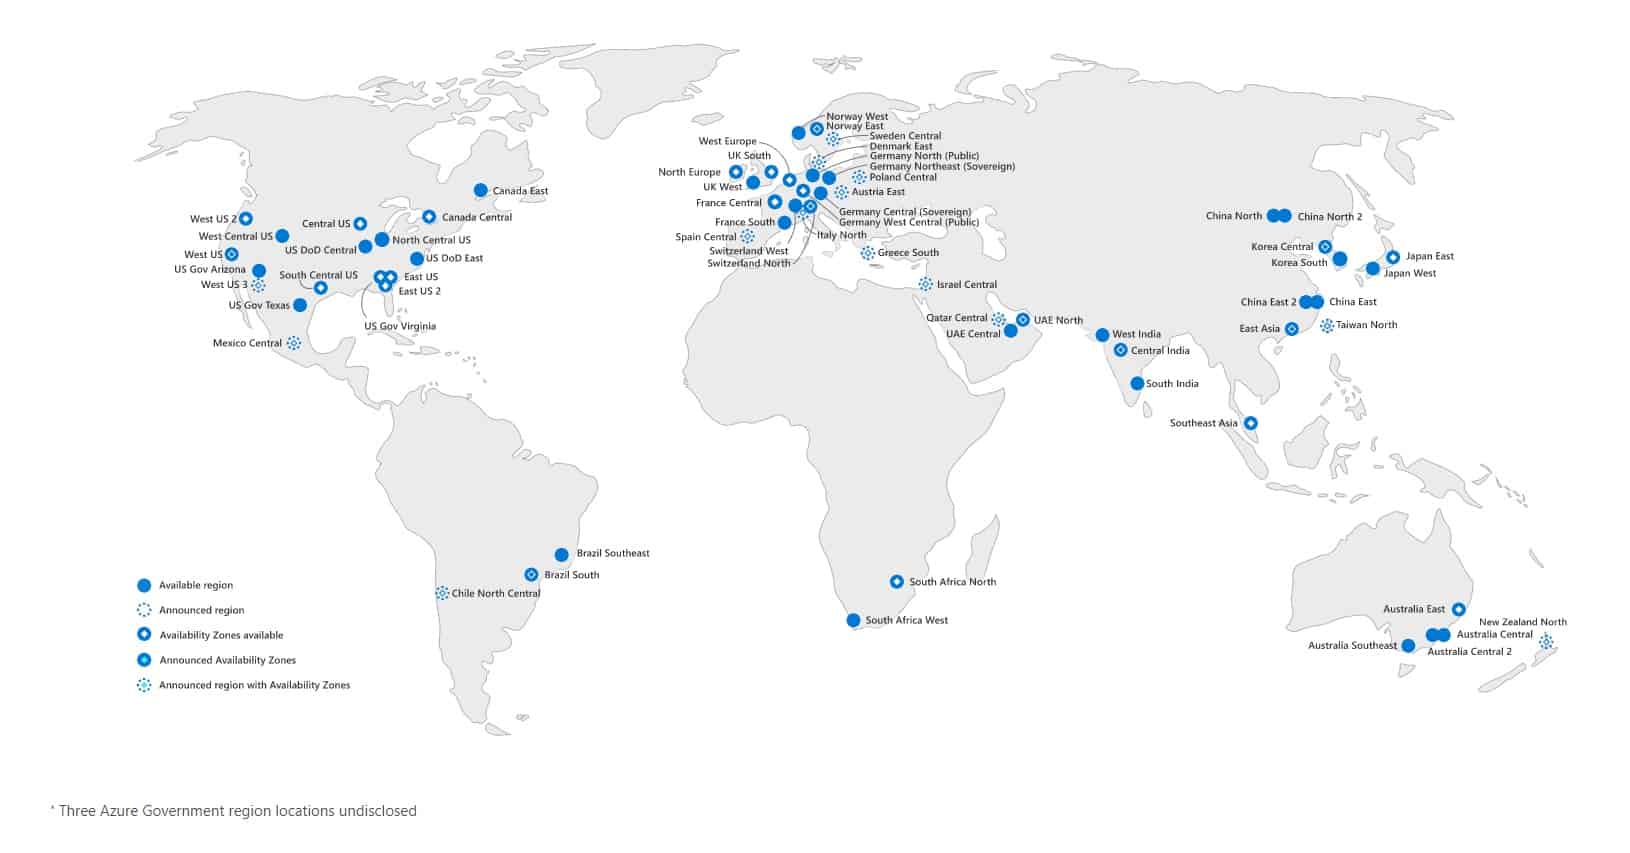 Azure geography and Azure Regions